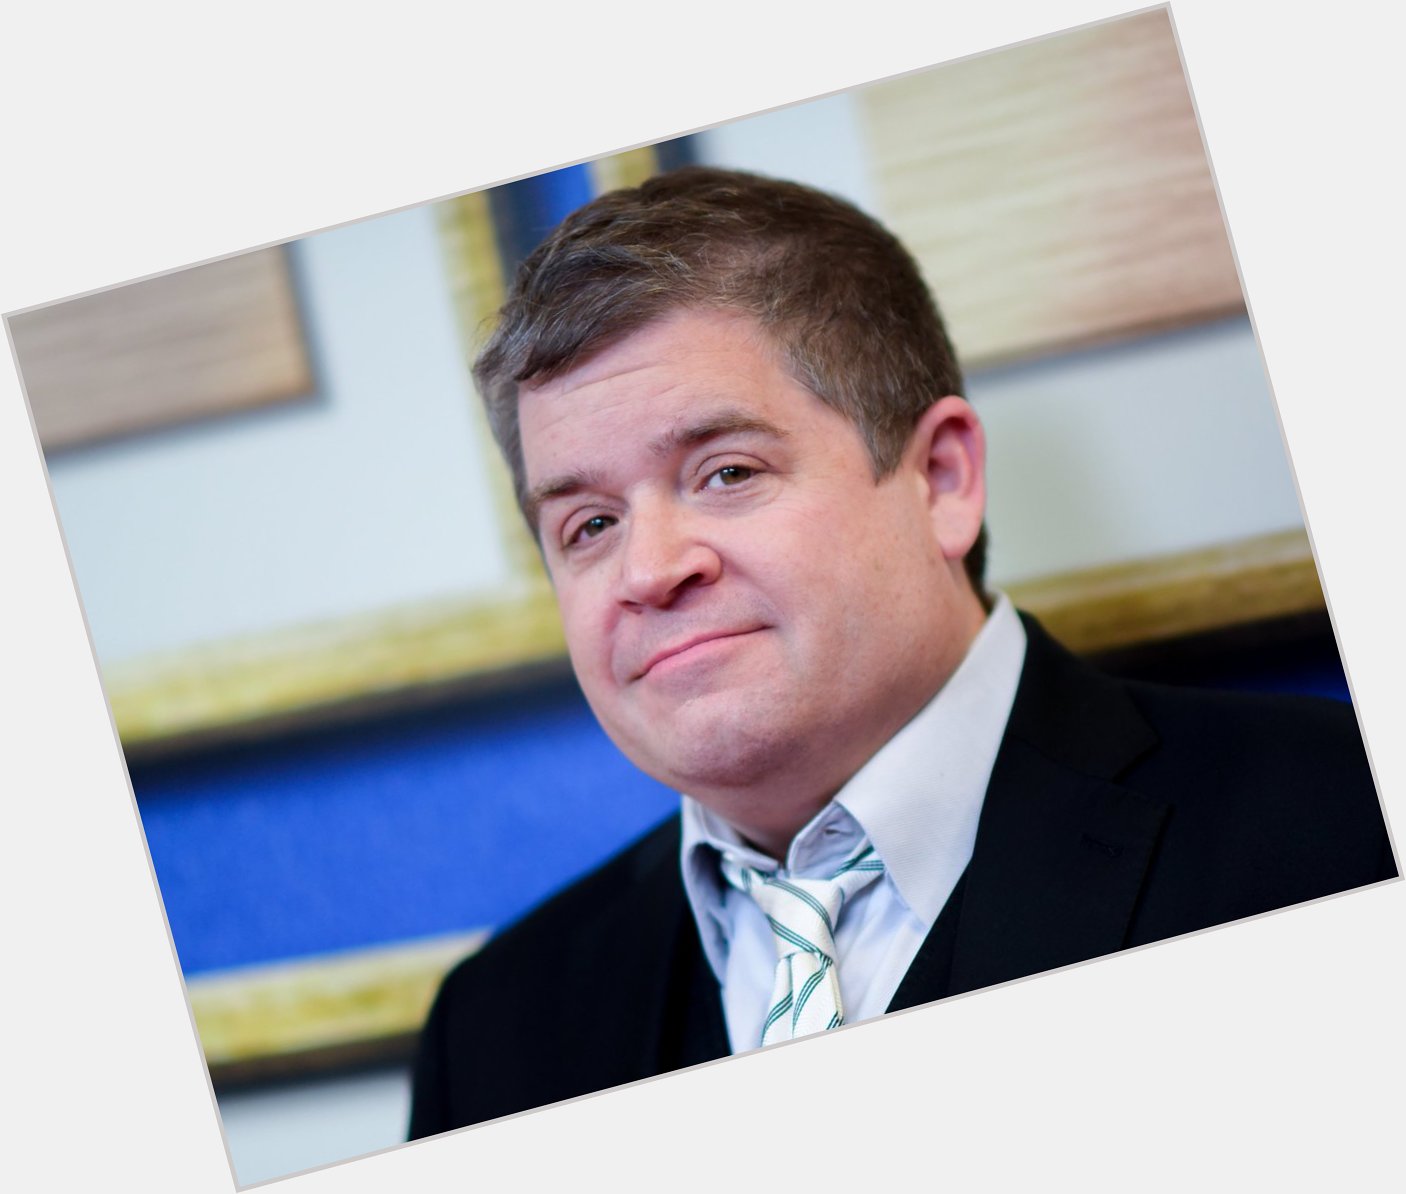 Happy birthday to Patton Oswalt!

Did you know he was the voice of the infamous Remy from Ratatouille? 